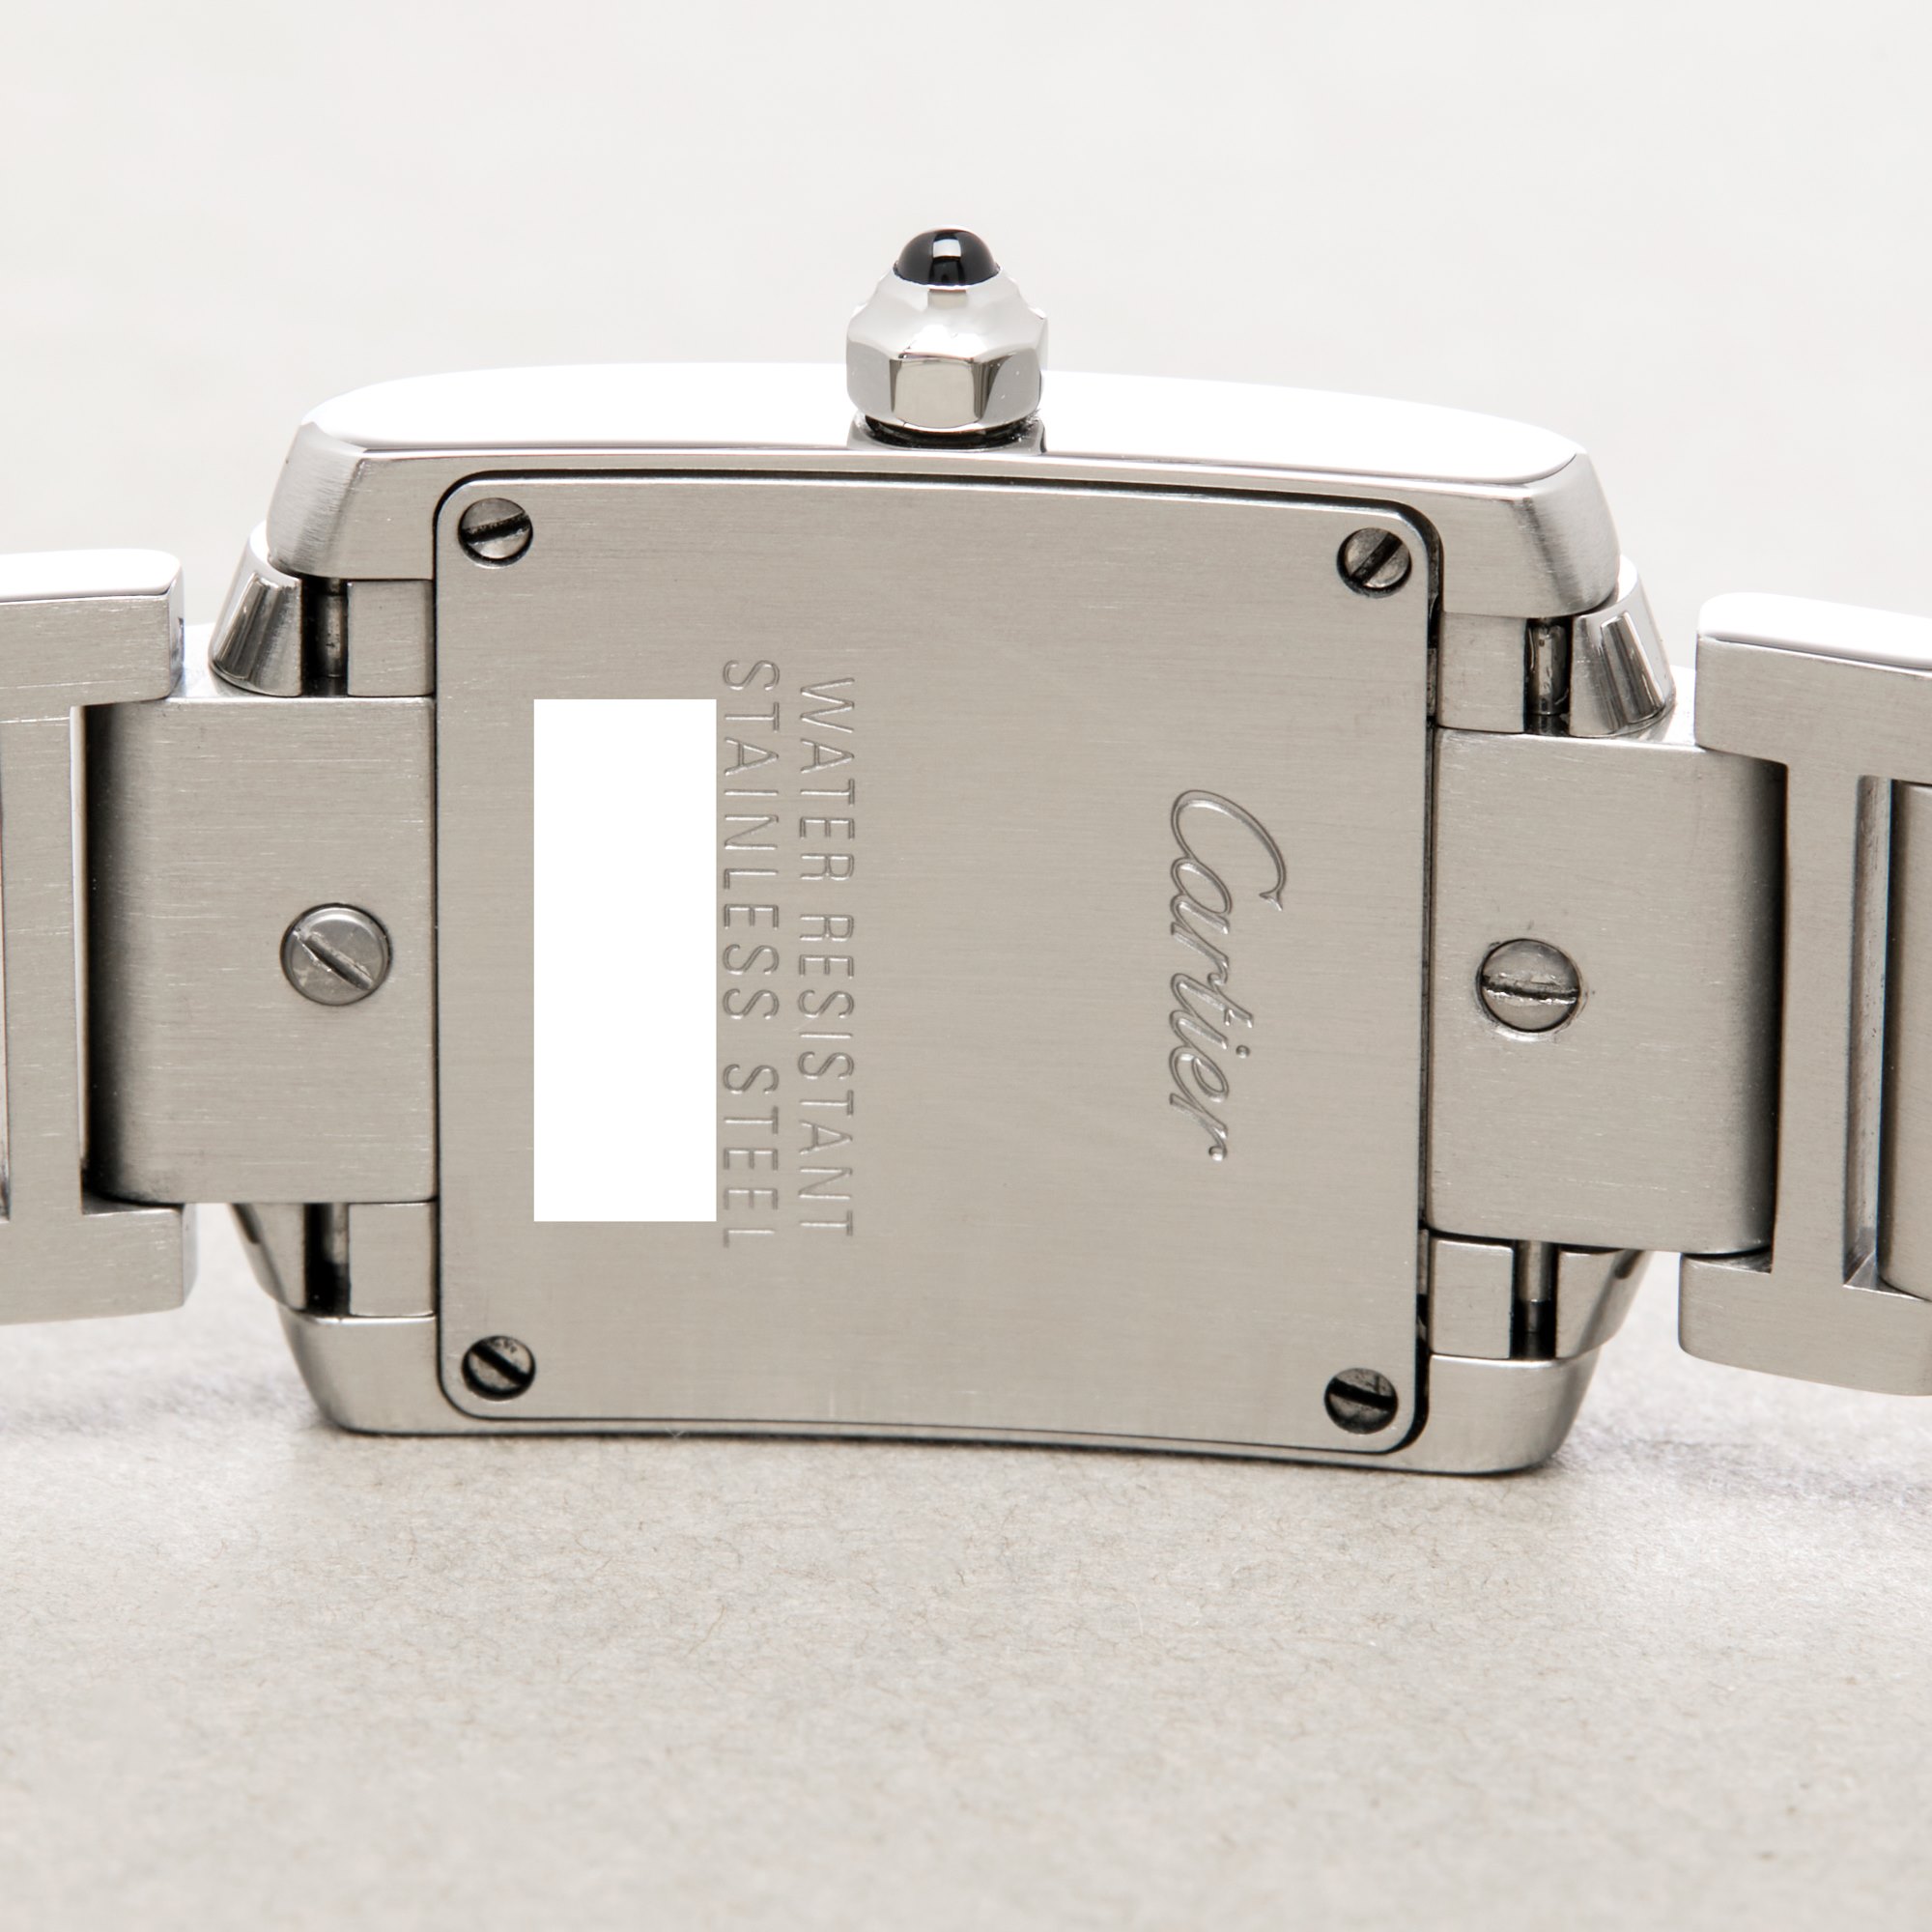 Cartier Tank Francaise Stainless Steel W51008Q3 or 2384